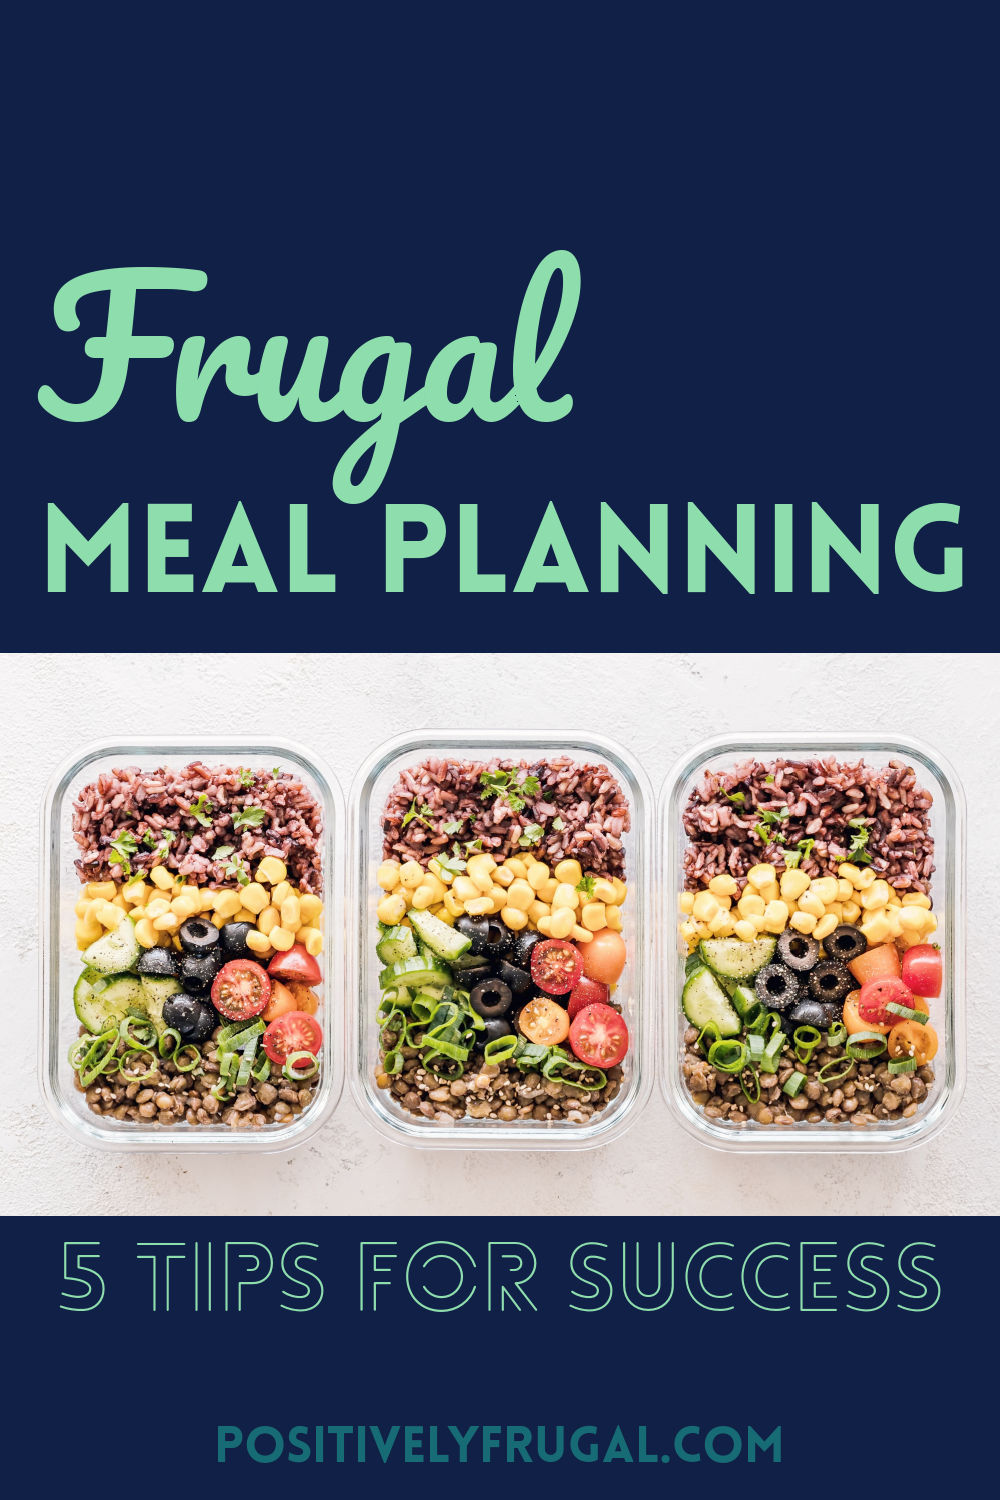 Frugal Meal Planning: 5 Tips for Success - Positively Frugal